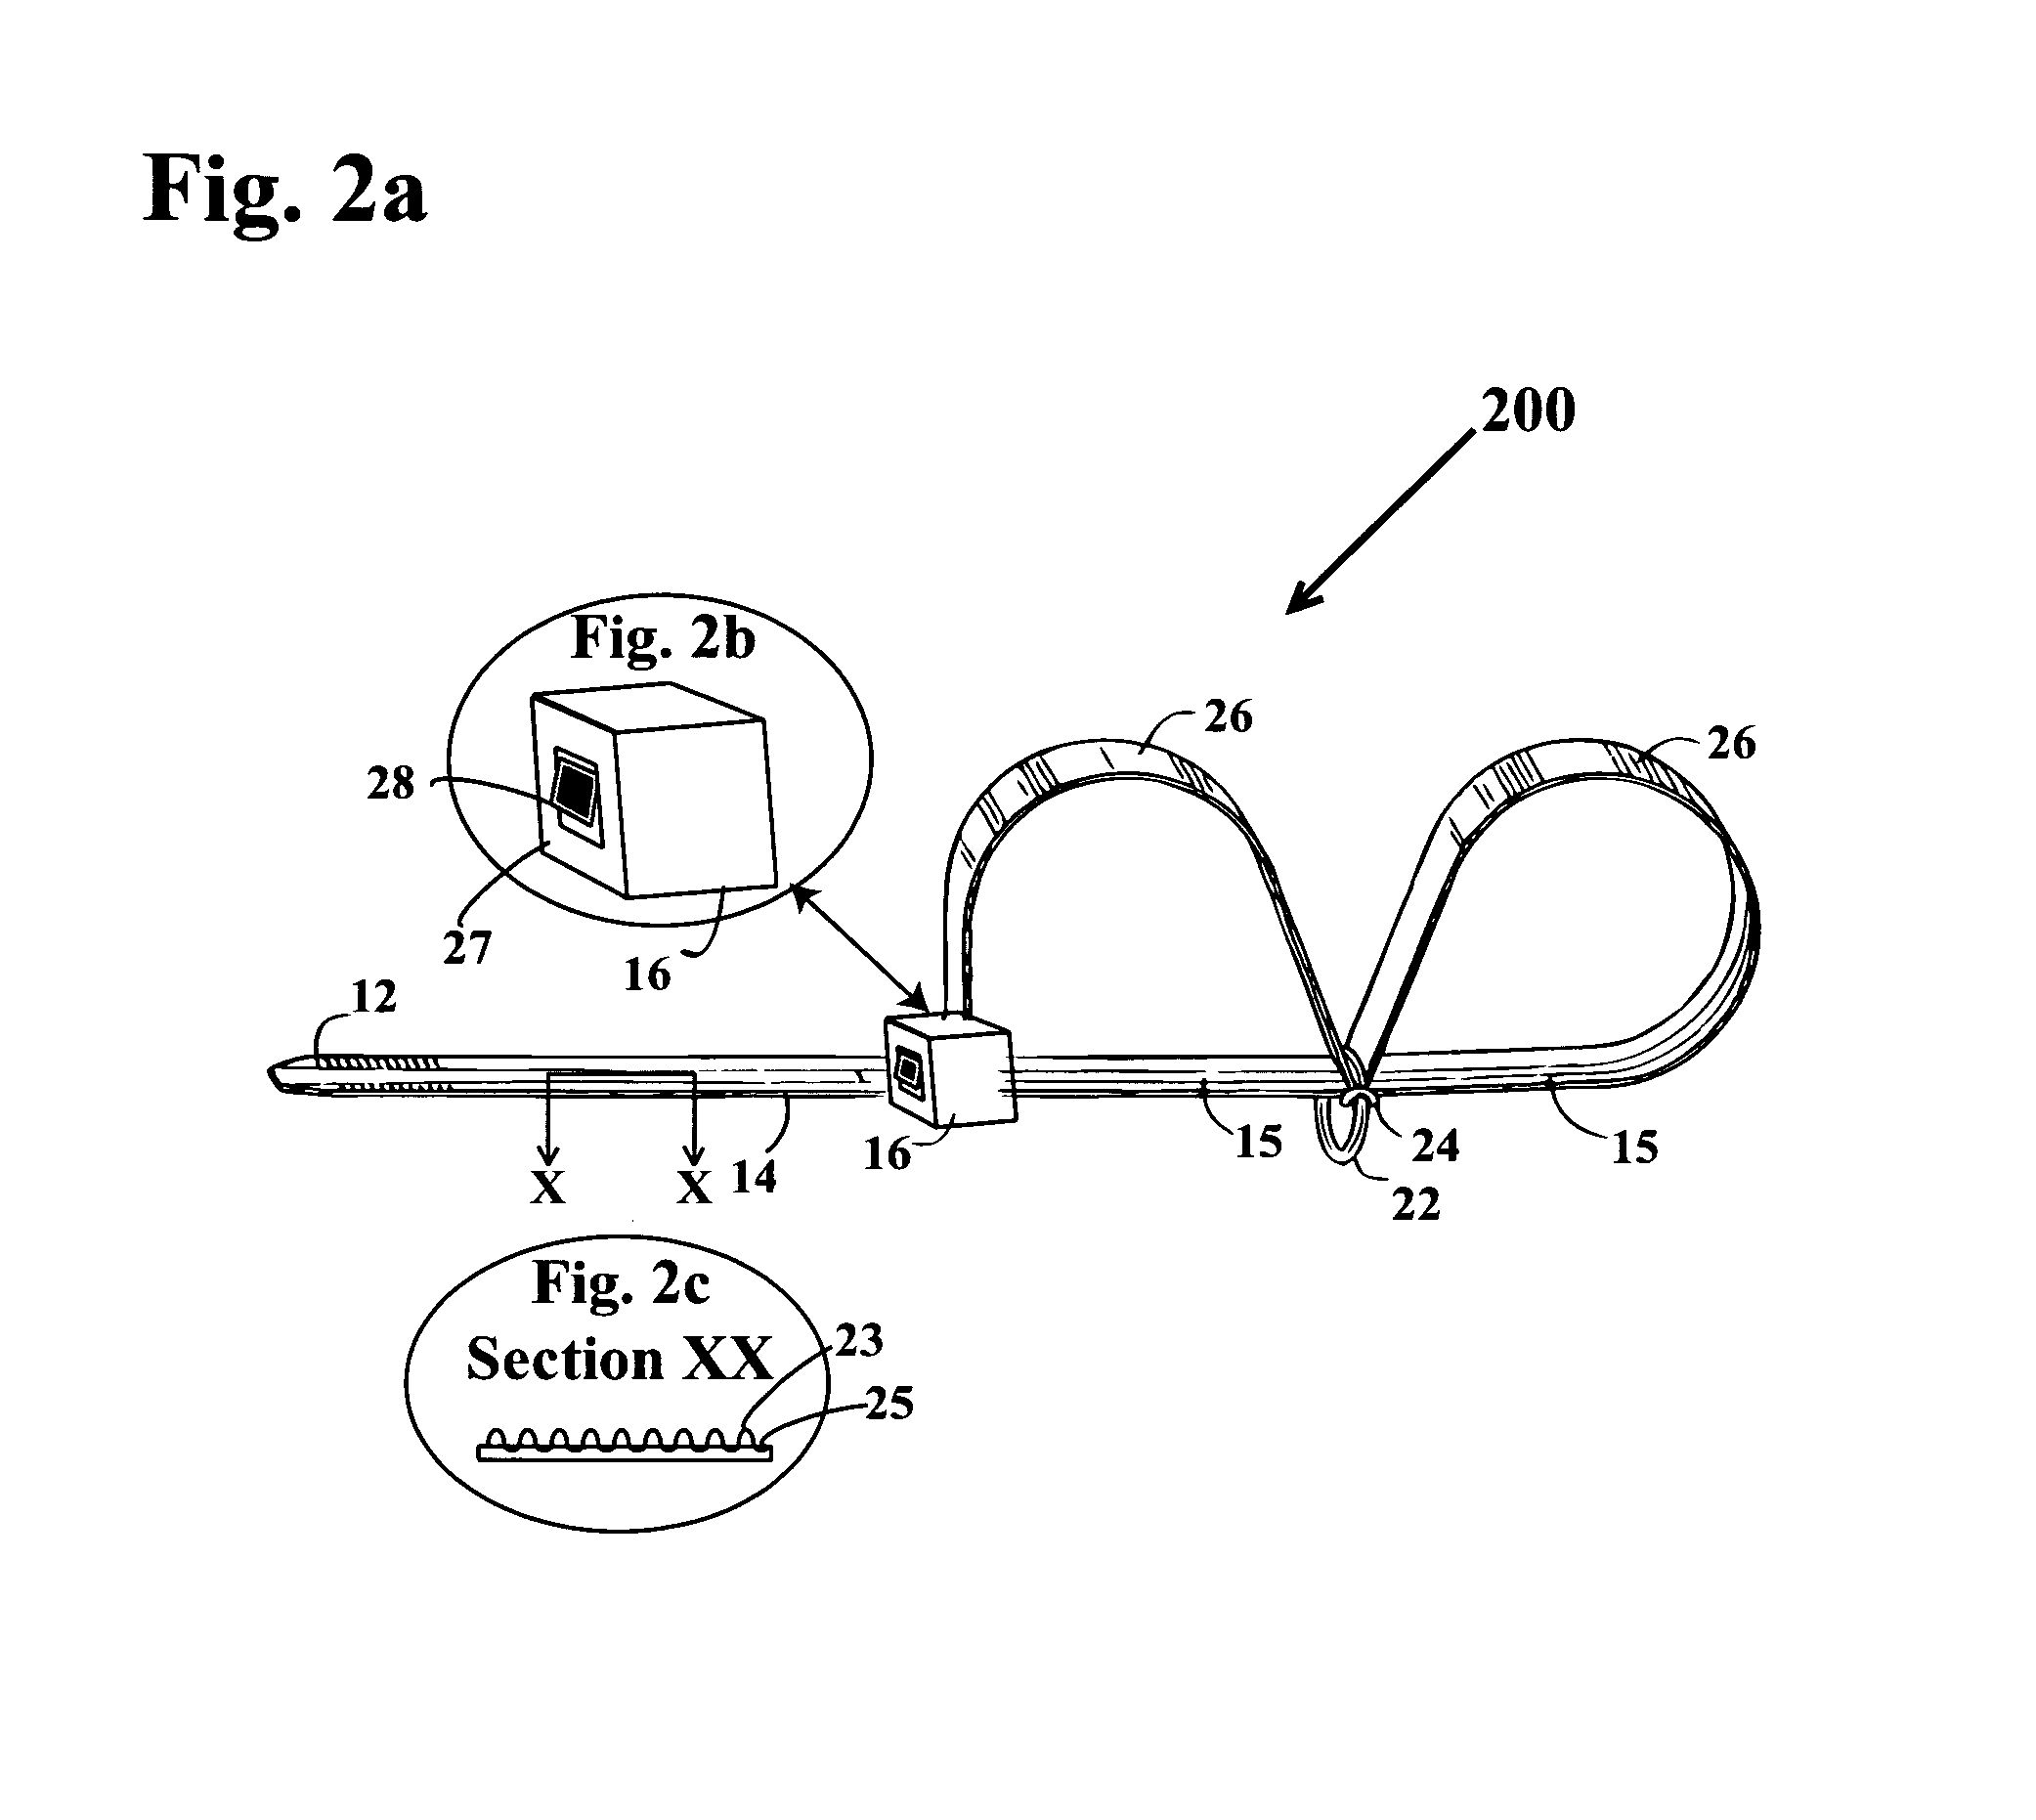 Flexible disposable lightweight secure handcuff system